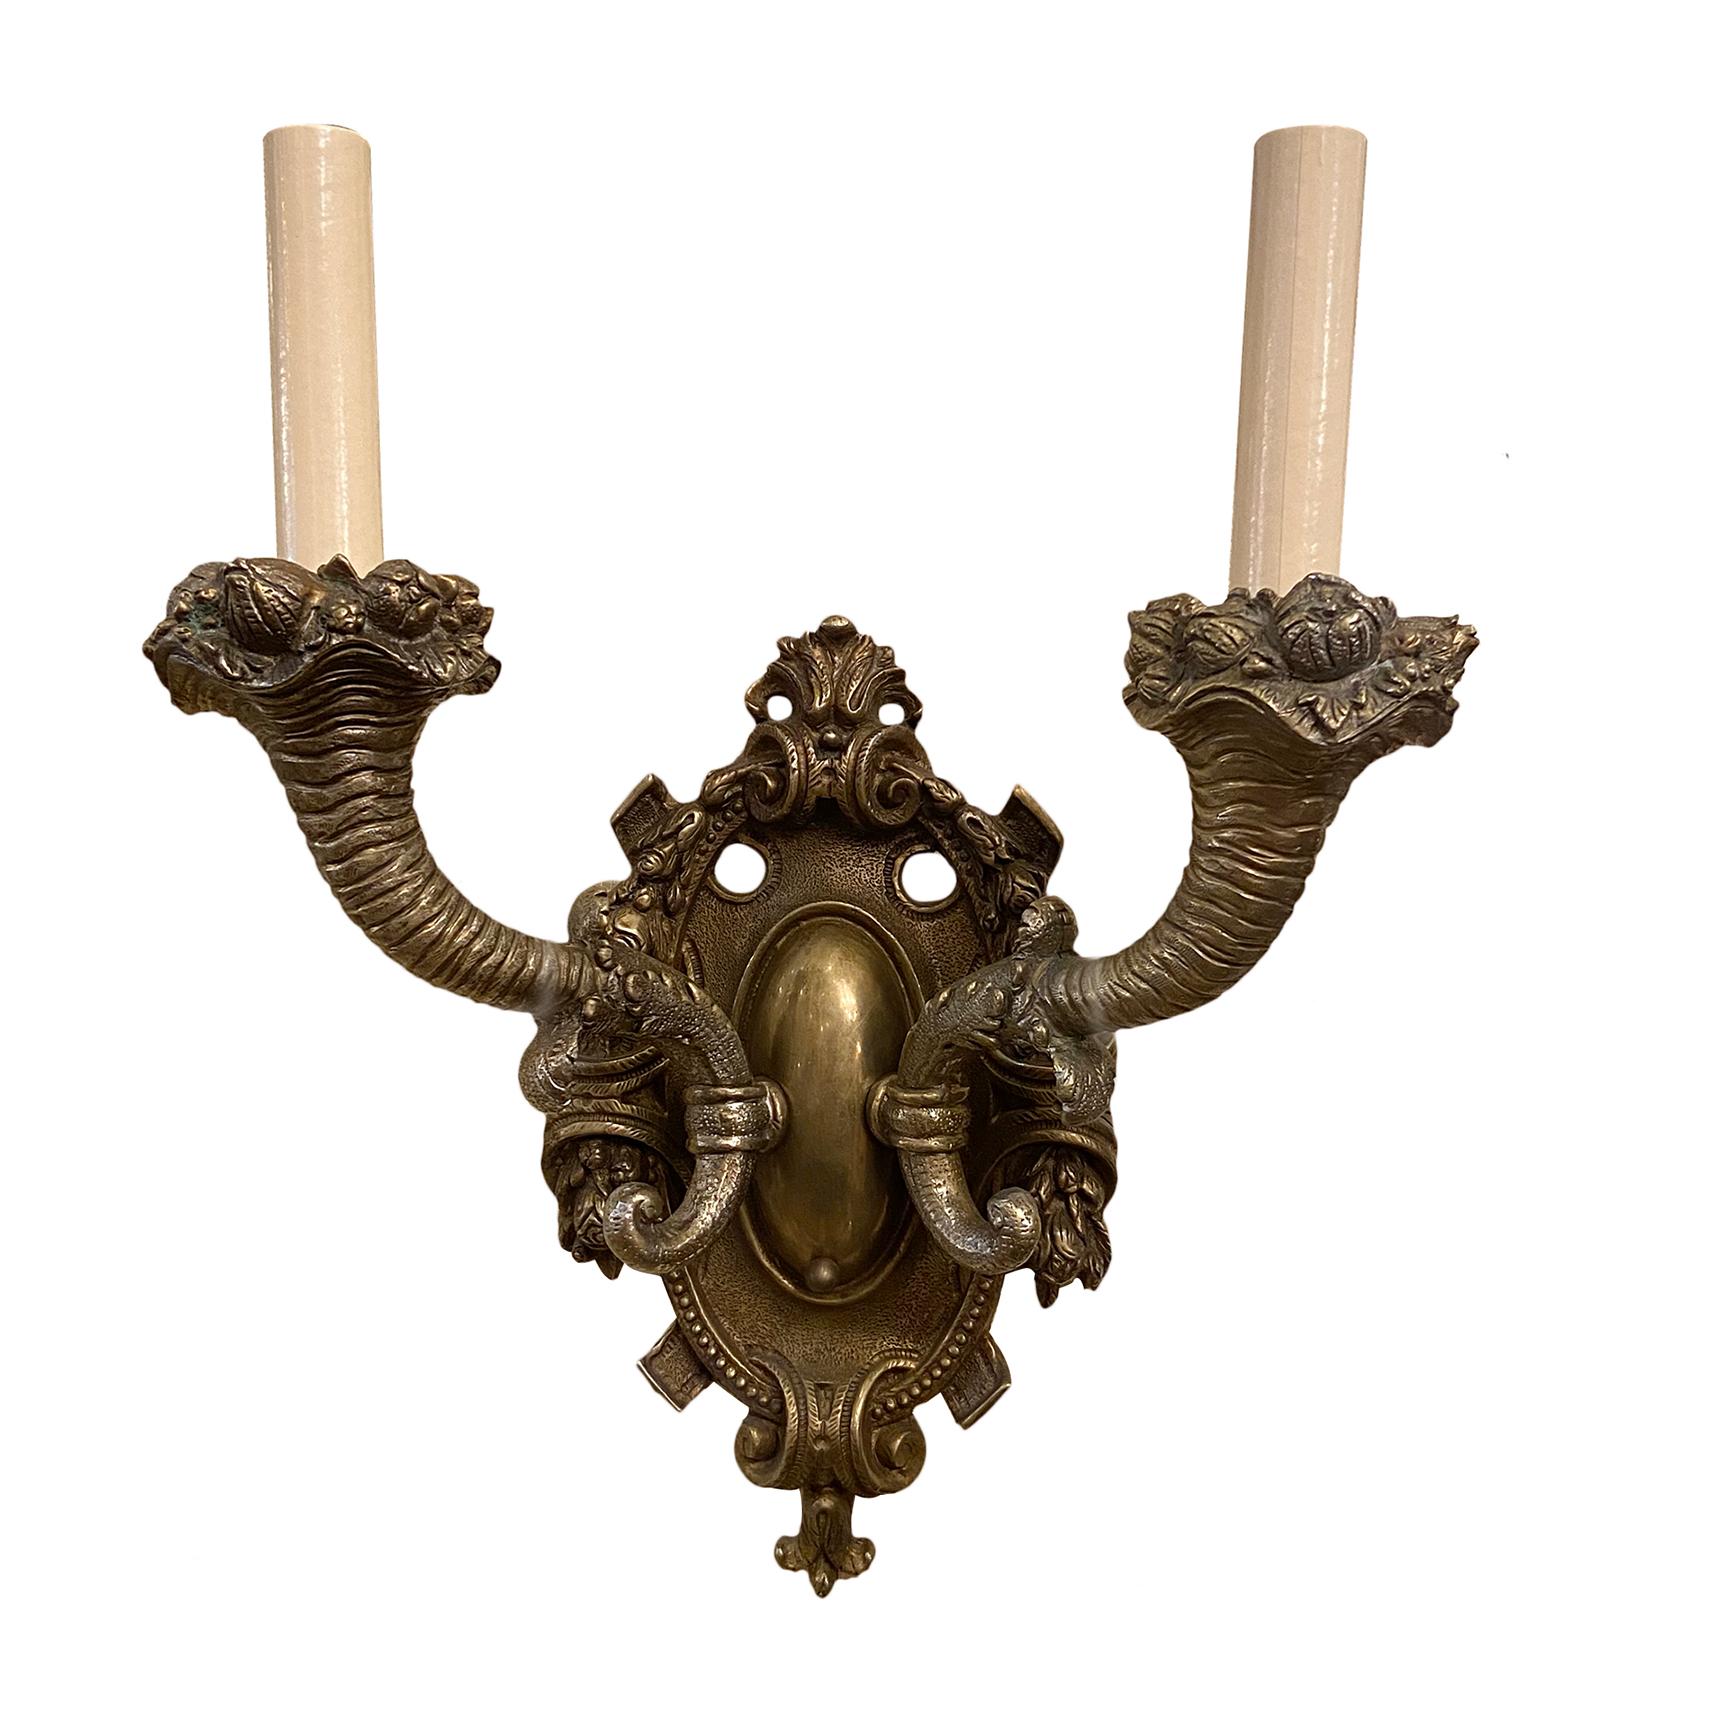 Set of four circa 1940's French Cast bronze sconces with original patina. Sold in pairs.

Measurements:
Height: 15.5